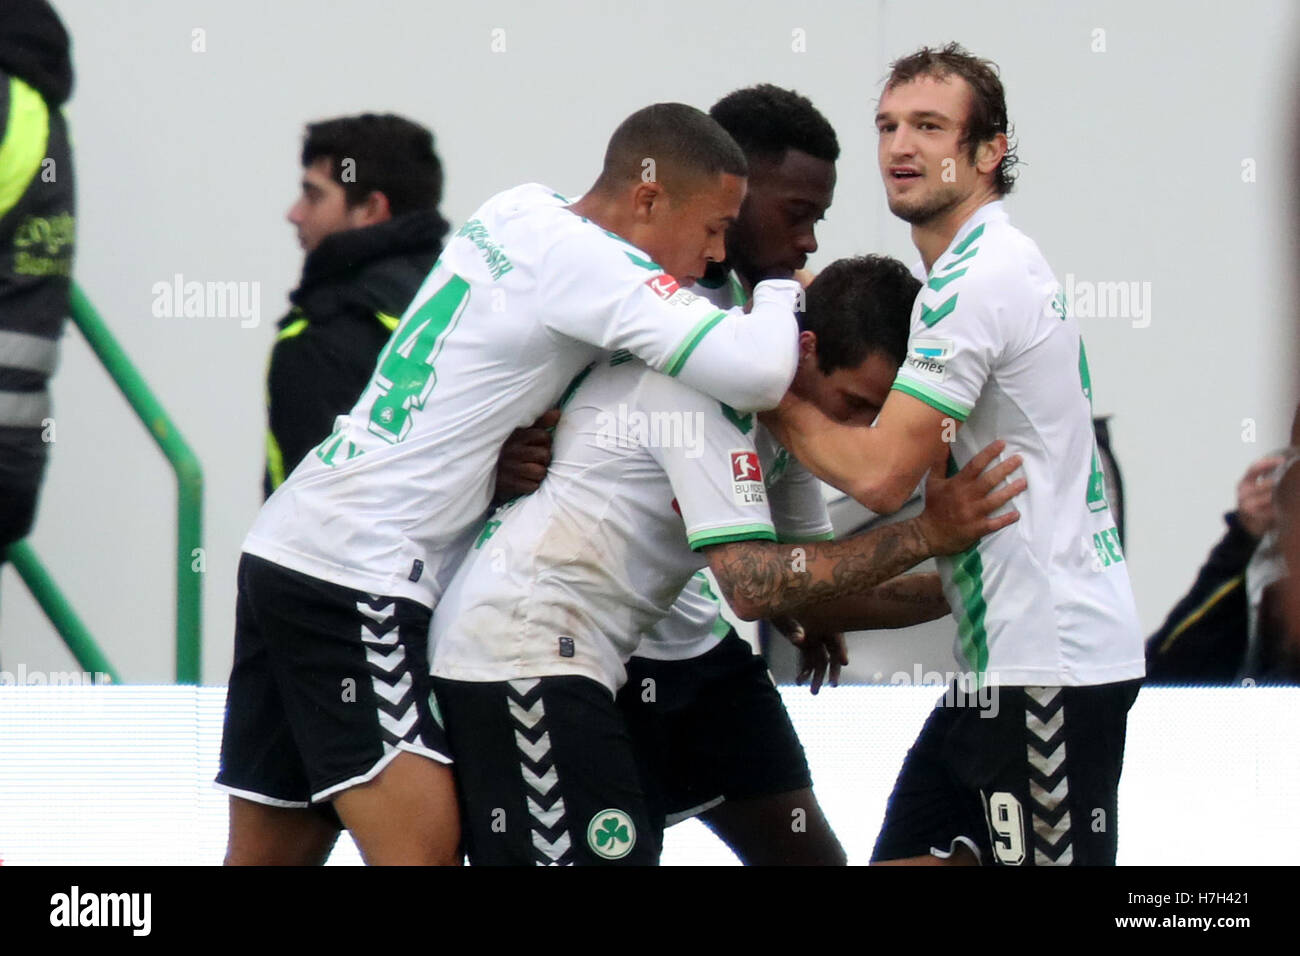 Furth, Germany. 5th Nov, 2016. Furth's goalscorer Sercan Sararer (2nd f.r.) cheers with his team mates Mathis Bolly (l), Khaled Narey (2nd f.l.) and Veton Berisha after scoring the 2:1 goal during the soccer match of SpVgg Greuther Furth and VfL Bochum on the 12th match day of the 2. Bundesliga at Stadion am Laubenweg in Furth, Germany, 5 November 2016. PHOTO: DANIEL KARMANN/dpa (ATTENTION: Due to the accreditation guidelines, the DFL only permits the publication and utilisation of up to 15 pictures per match on the internet and in online media during the match.) Credit:  dpa/Alamy Live News Stock Photo